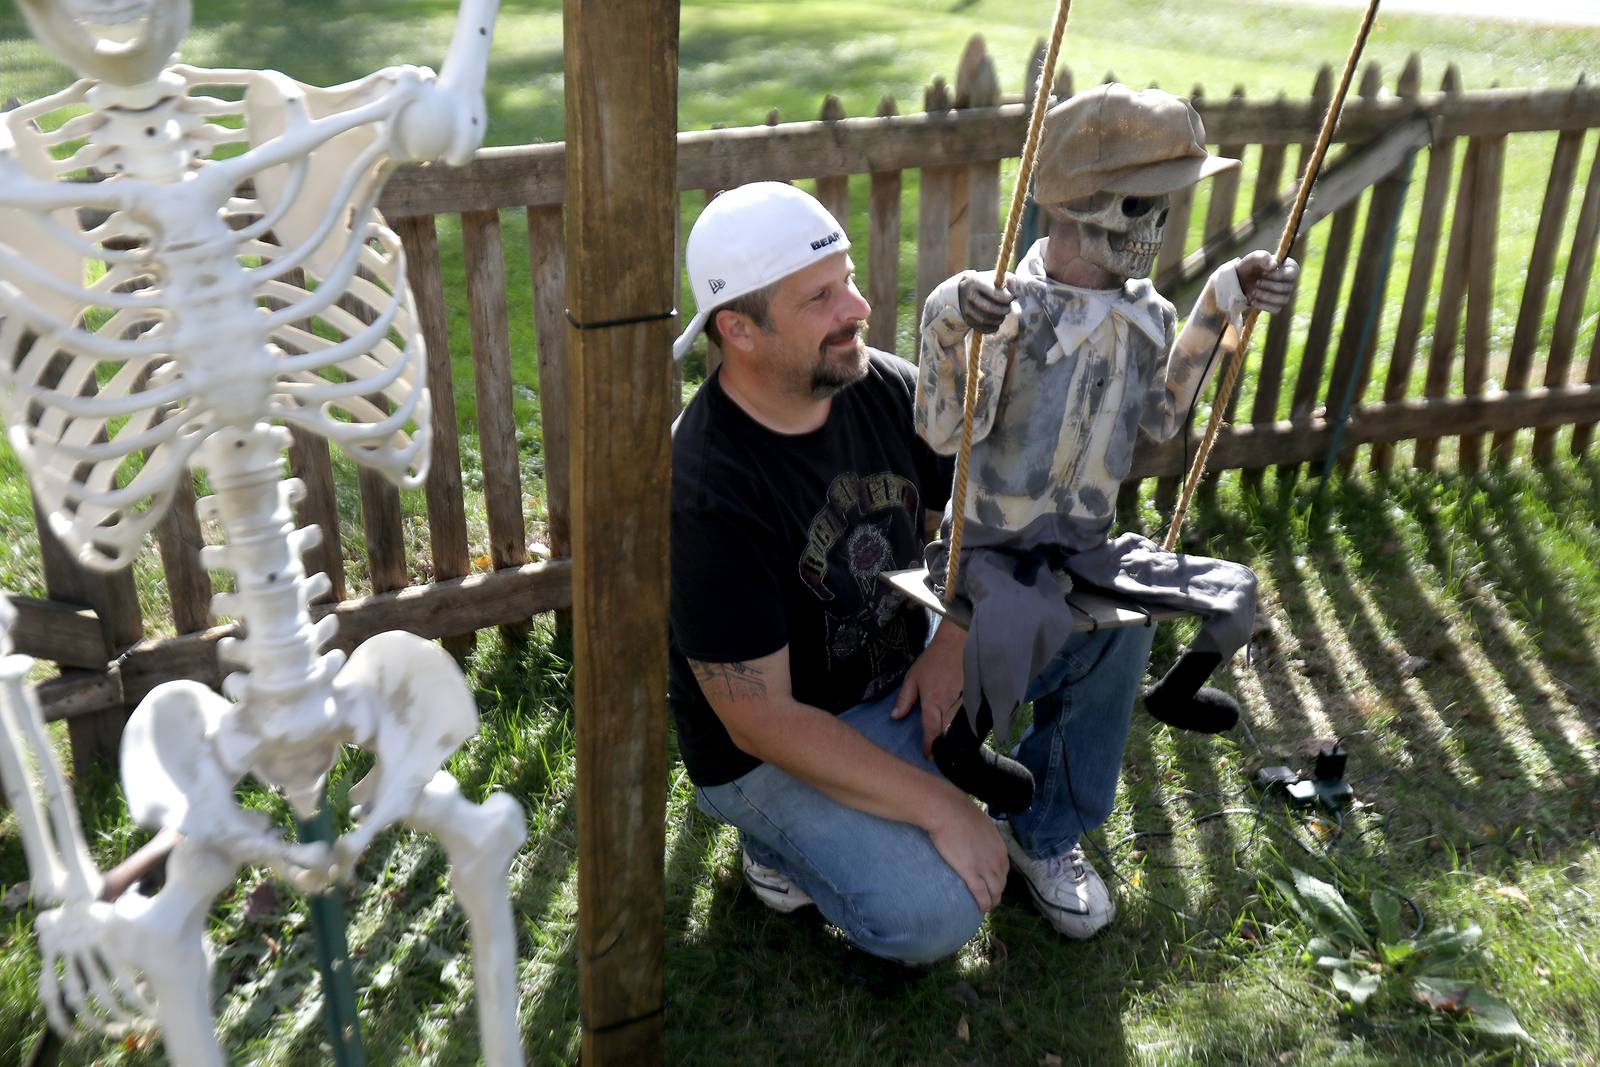 Spooky Scary Downers Grove house transformed into Halloween